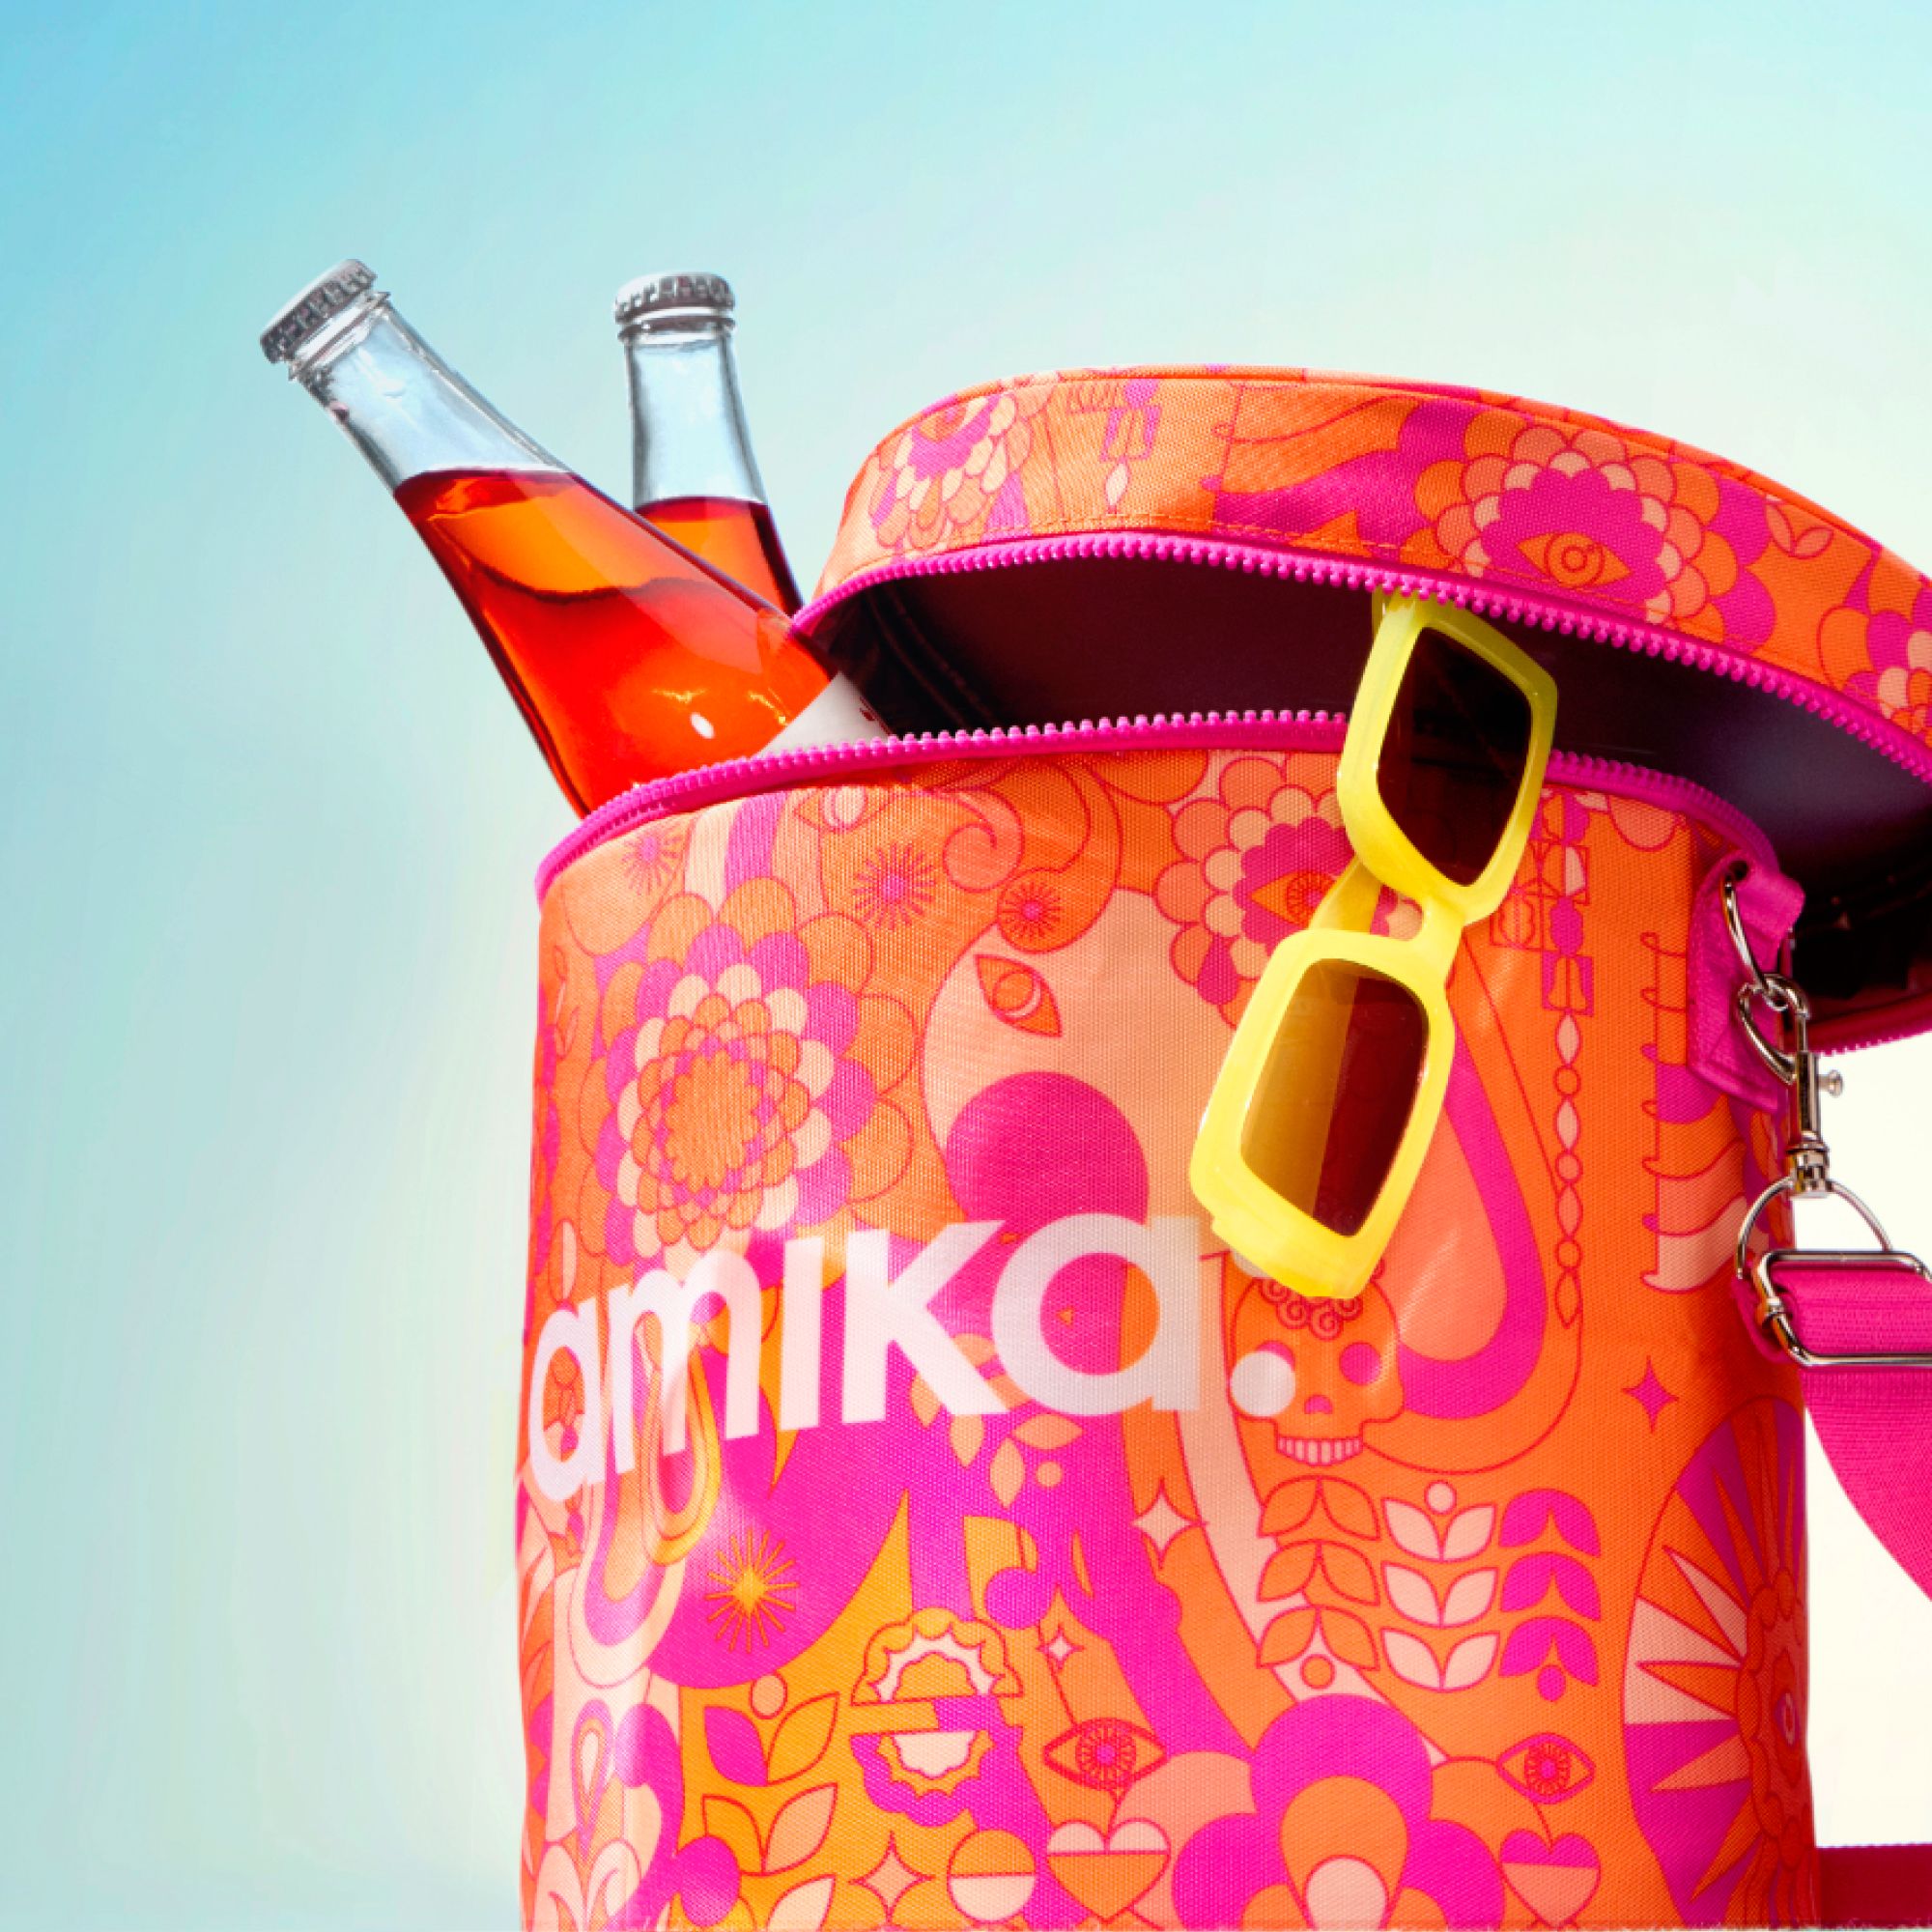 an image of a circular amika bag with yellow sunglasses hanging on the right side and two glass bottles of beverage inside the bag on the left side